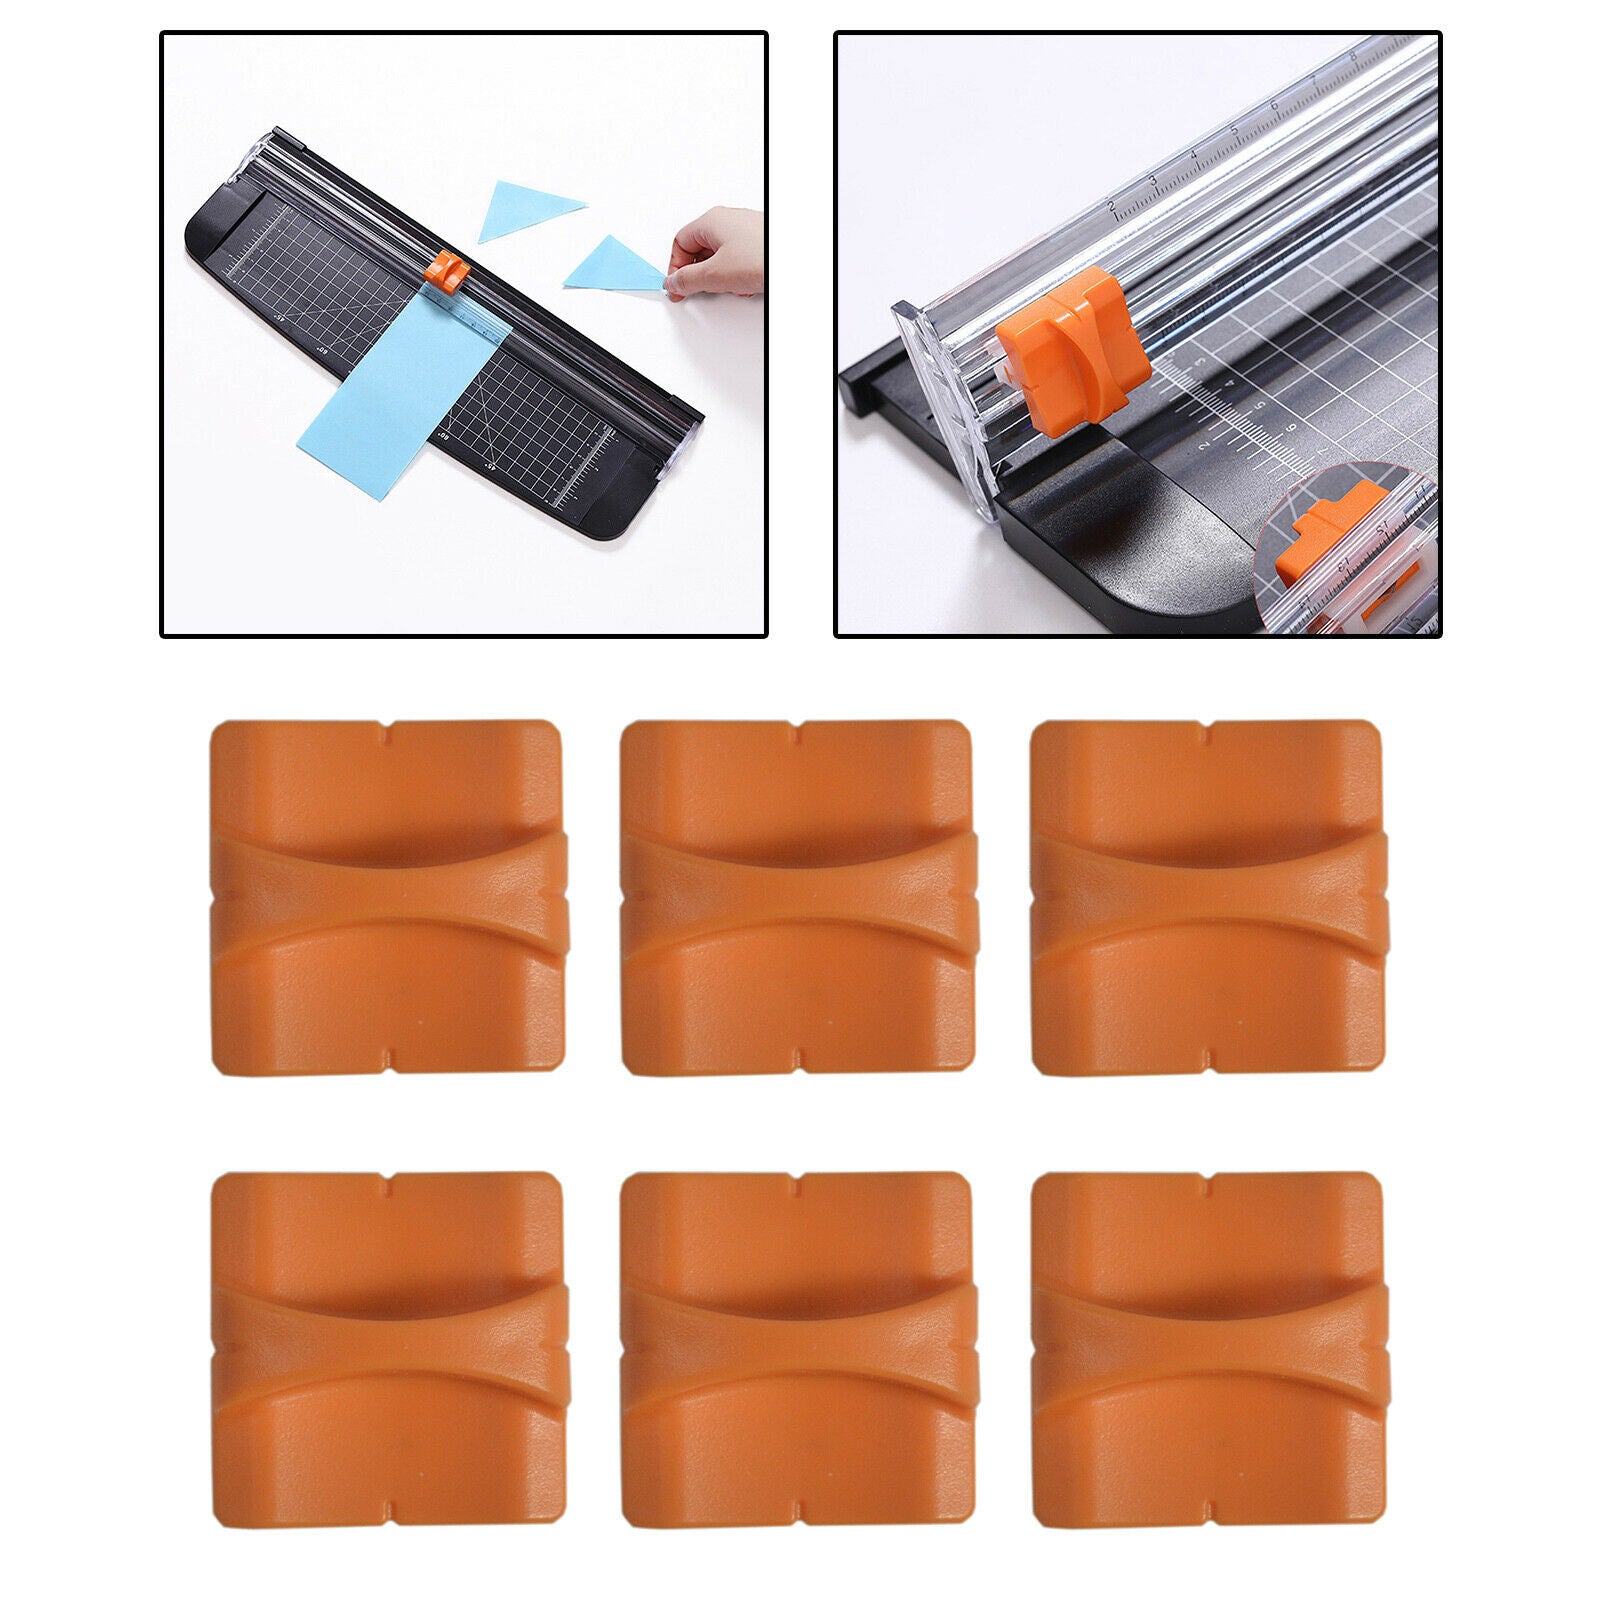 6Pcs Paper Cutter Replacement Blades Trimmer Cutting A4 Paper Pages Tool